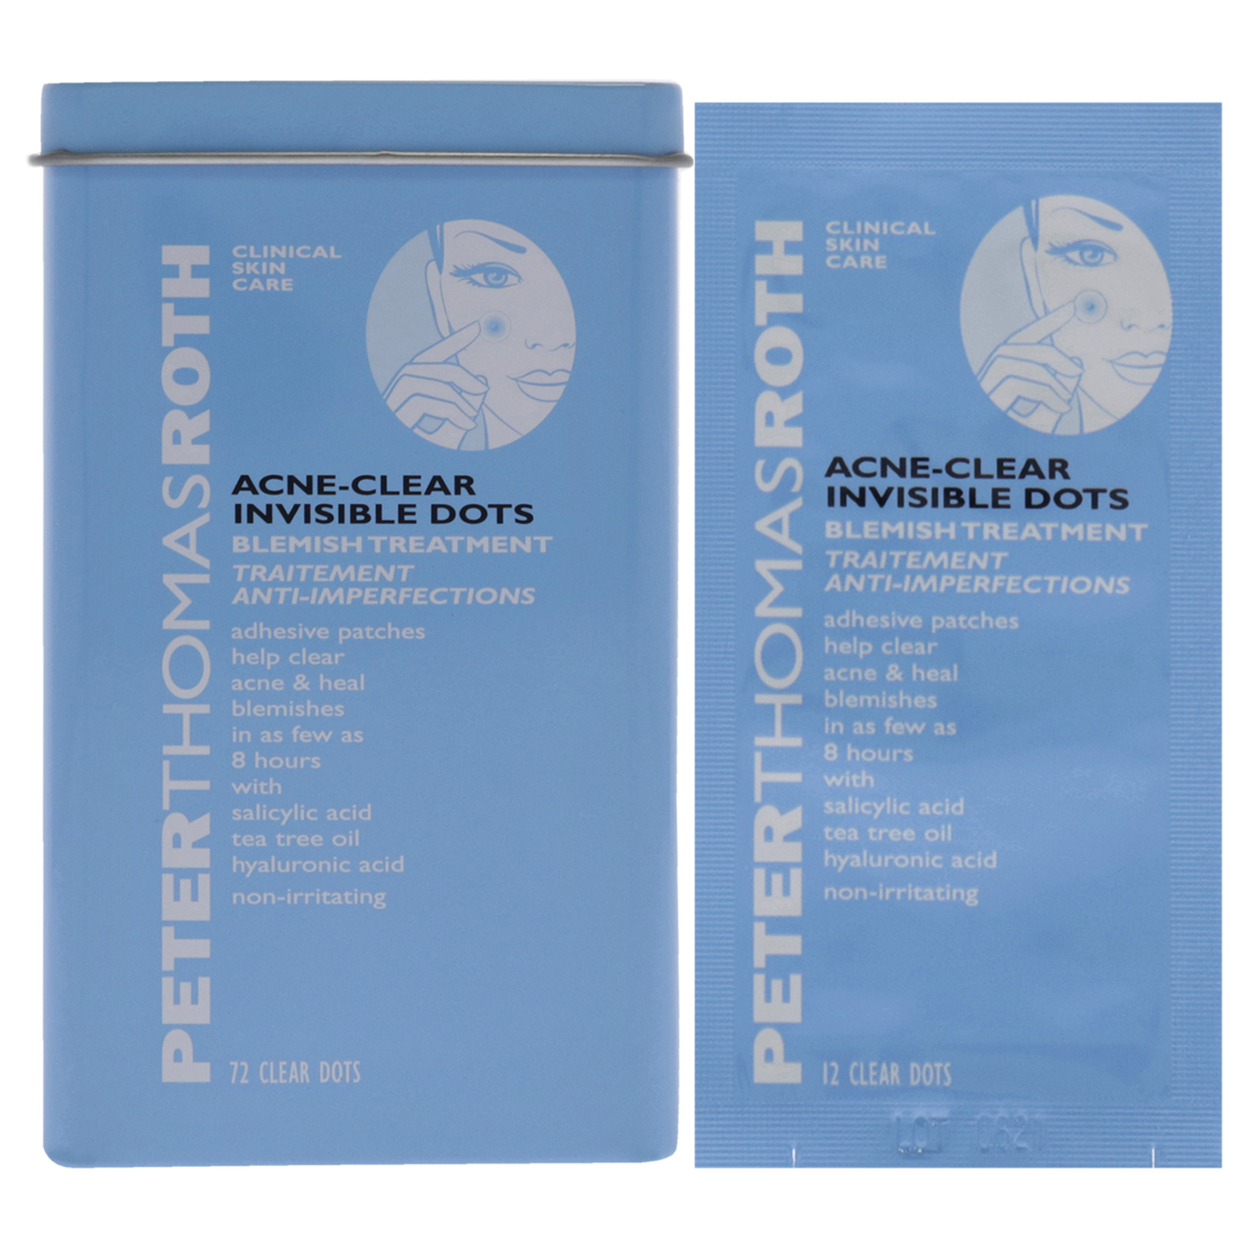 Peter Thomas Roth Acne-Clear Invisible Dots Treatment 72 Clear Dots